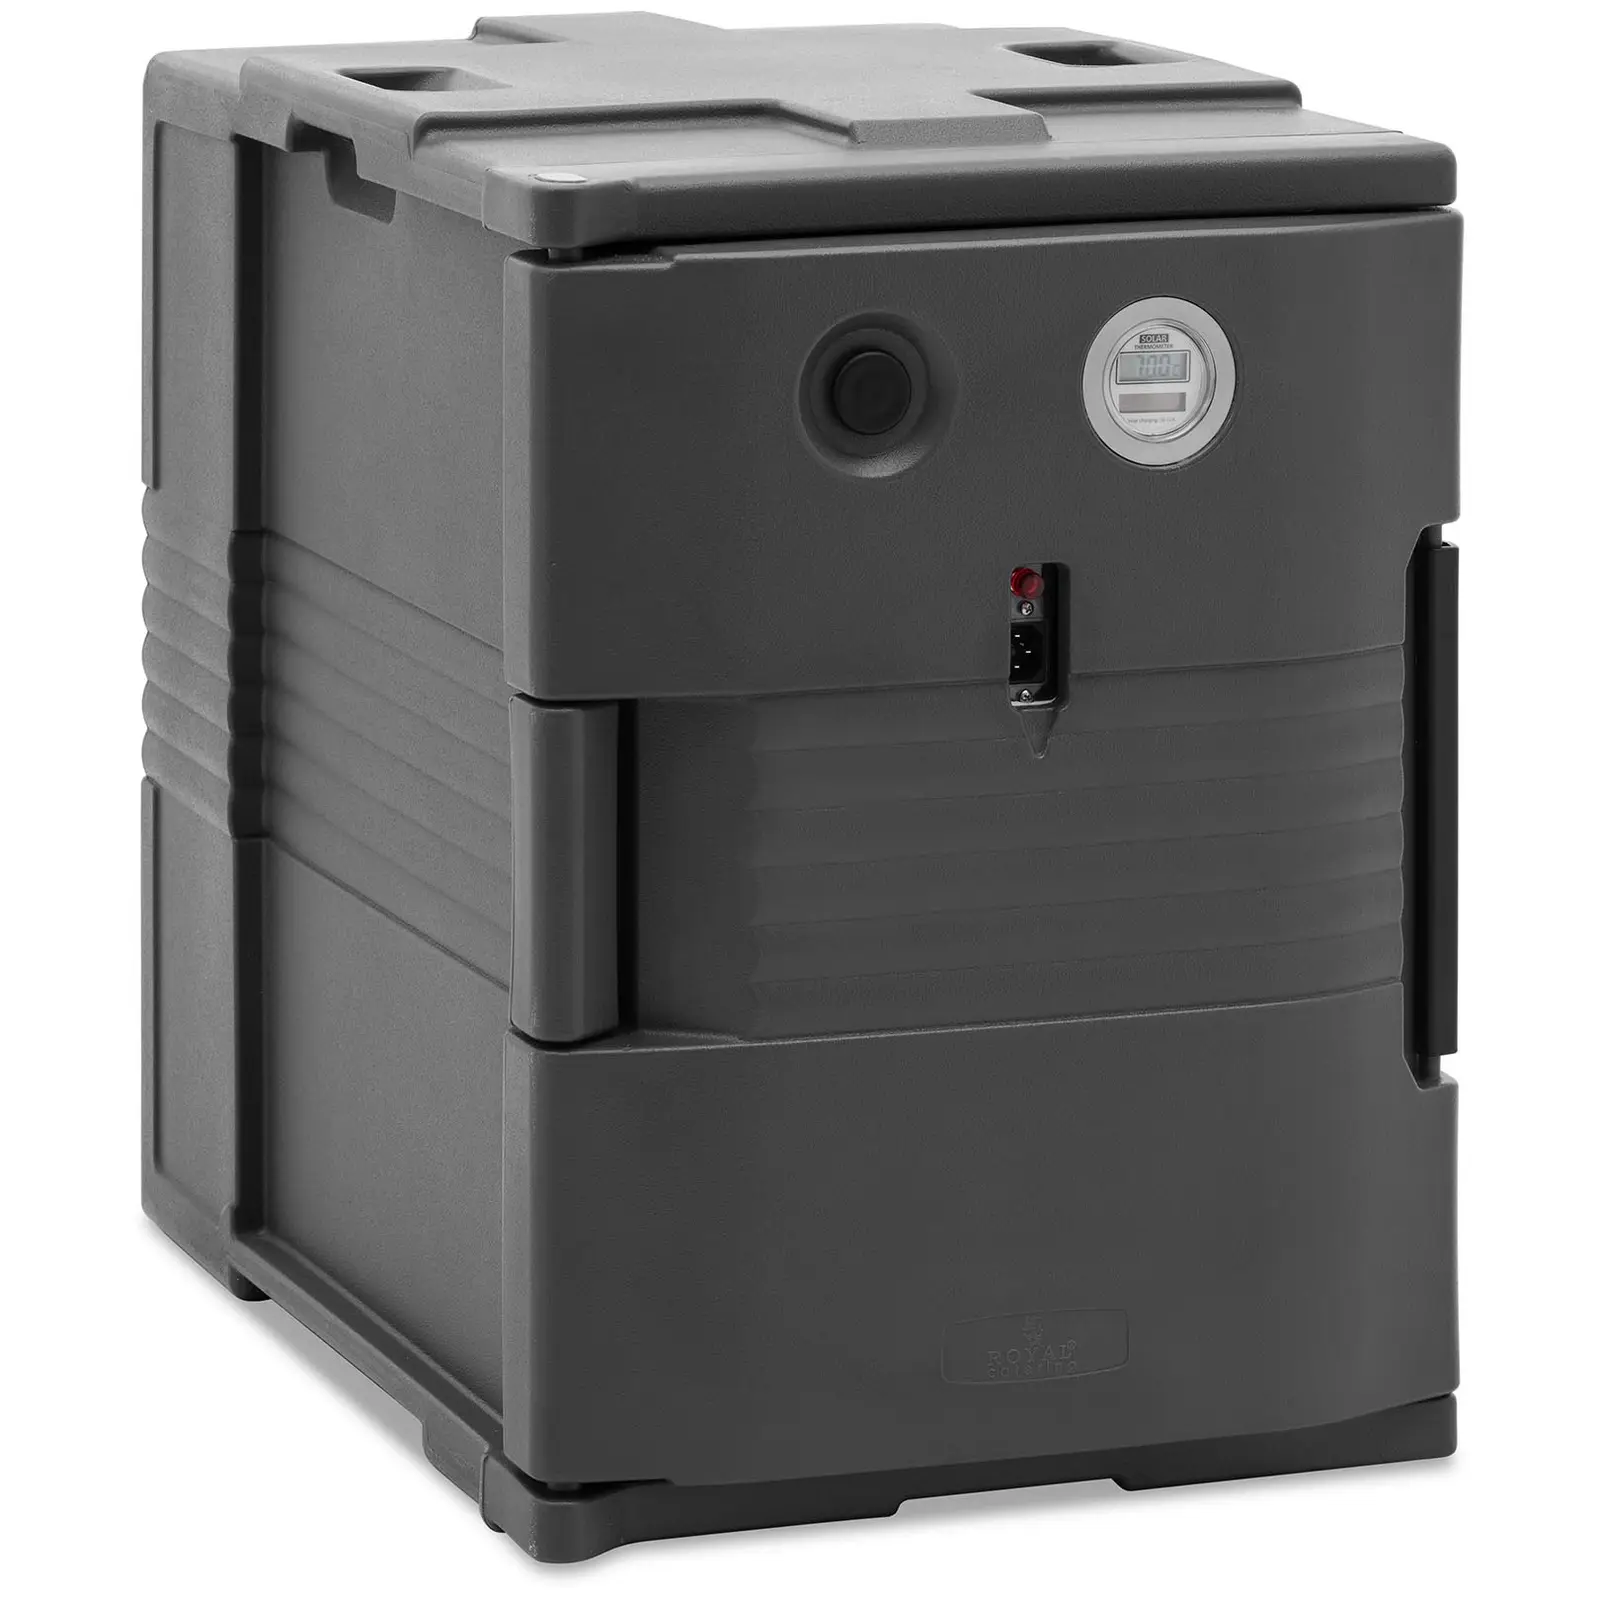 Thermobox heated - 90 L - for GN 1/1 containers - front loader - with temperature display